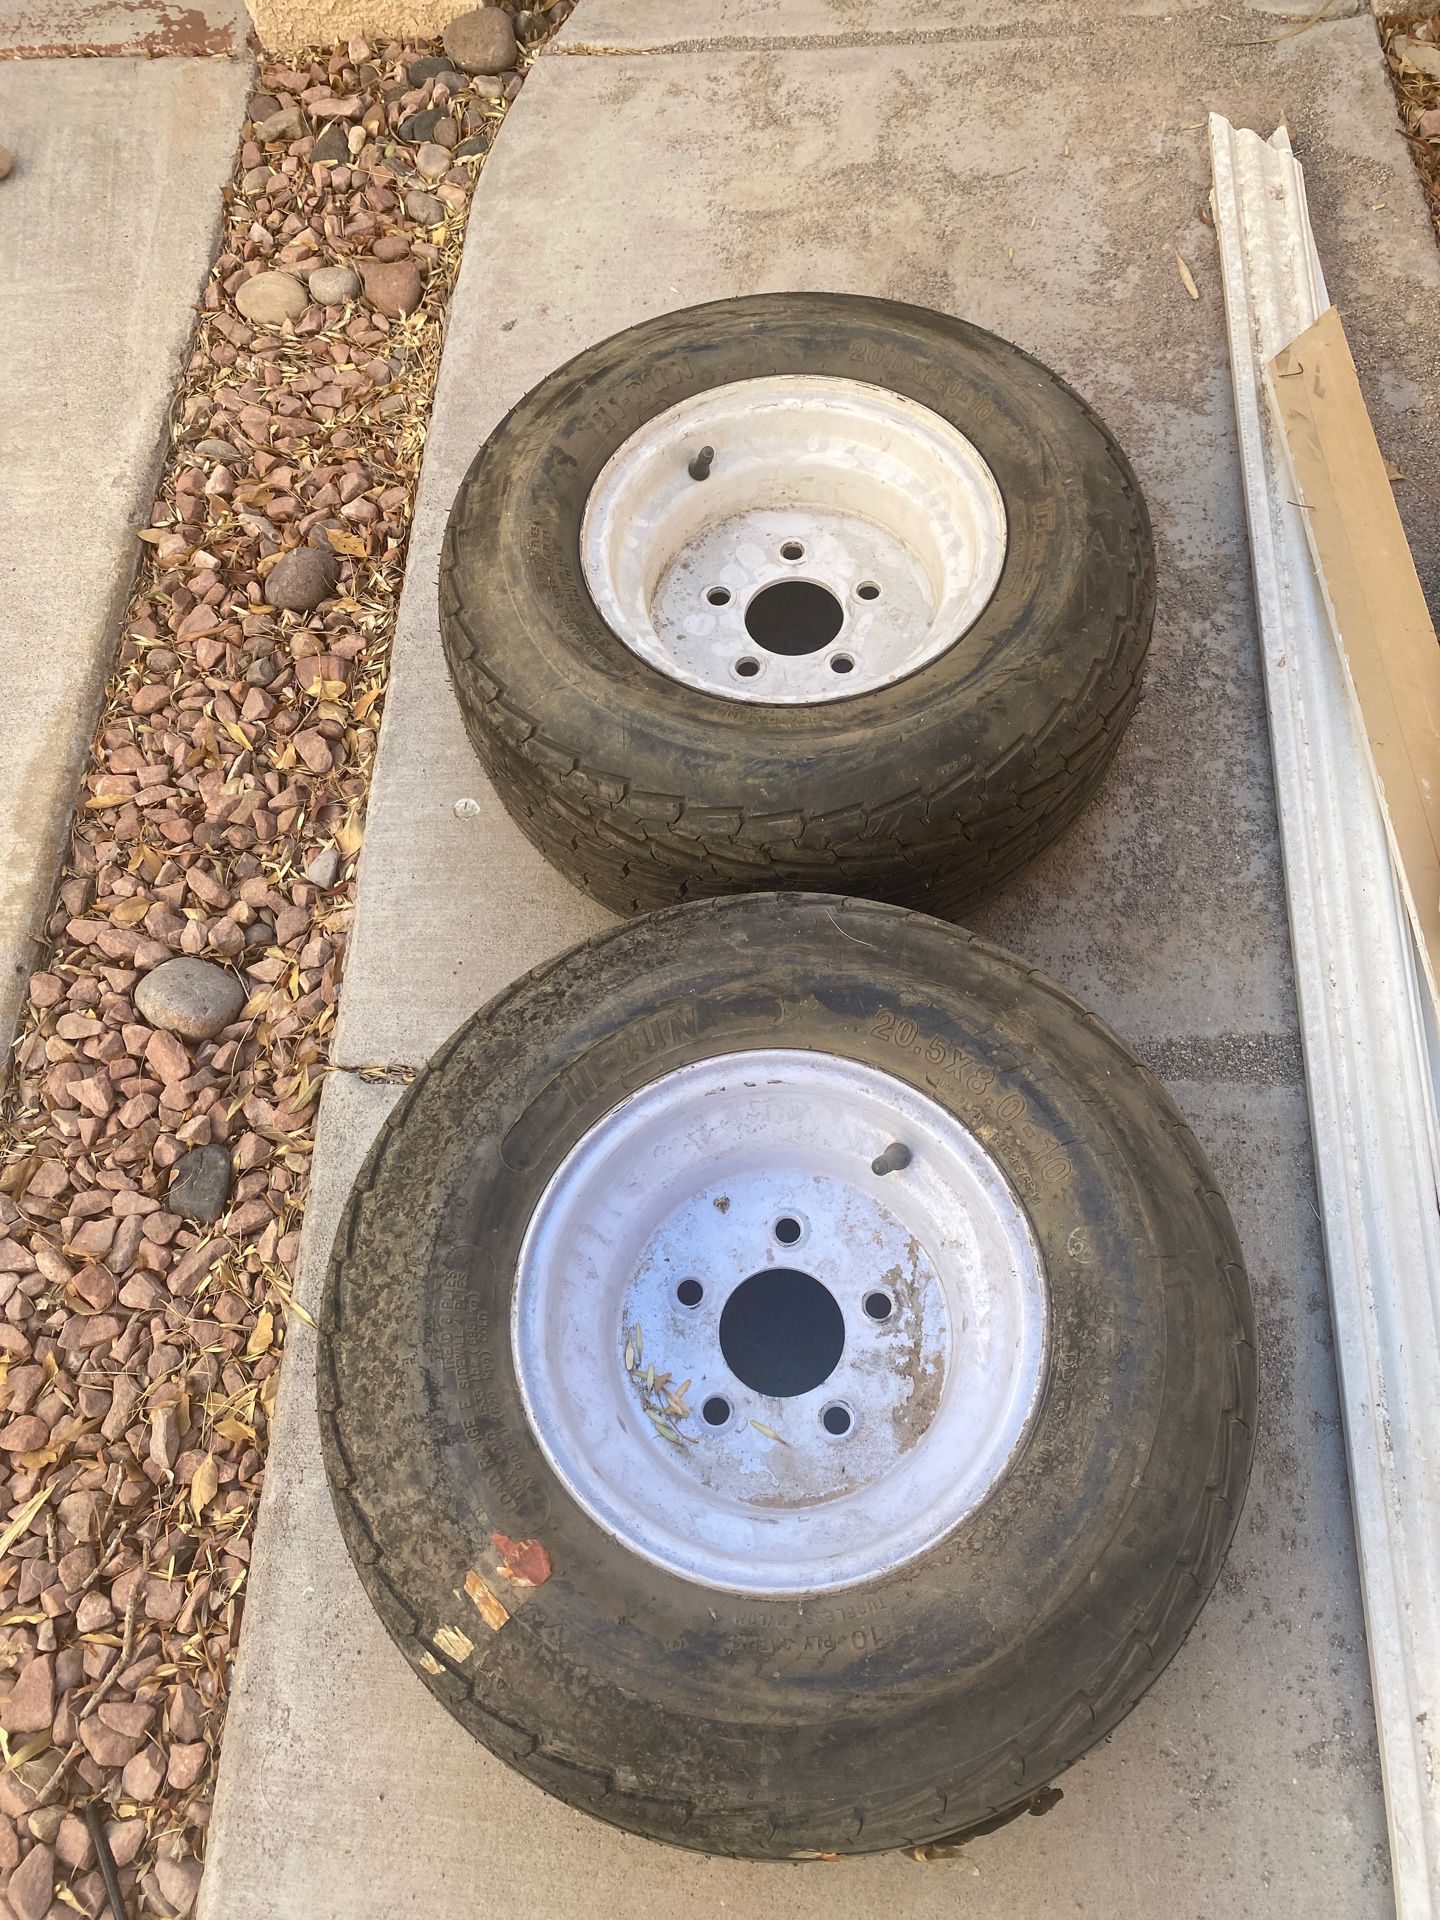 Two brand new trailer tires. 20.5/8 - 10